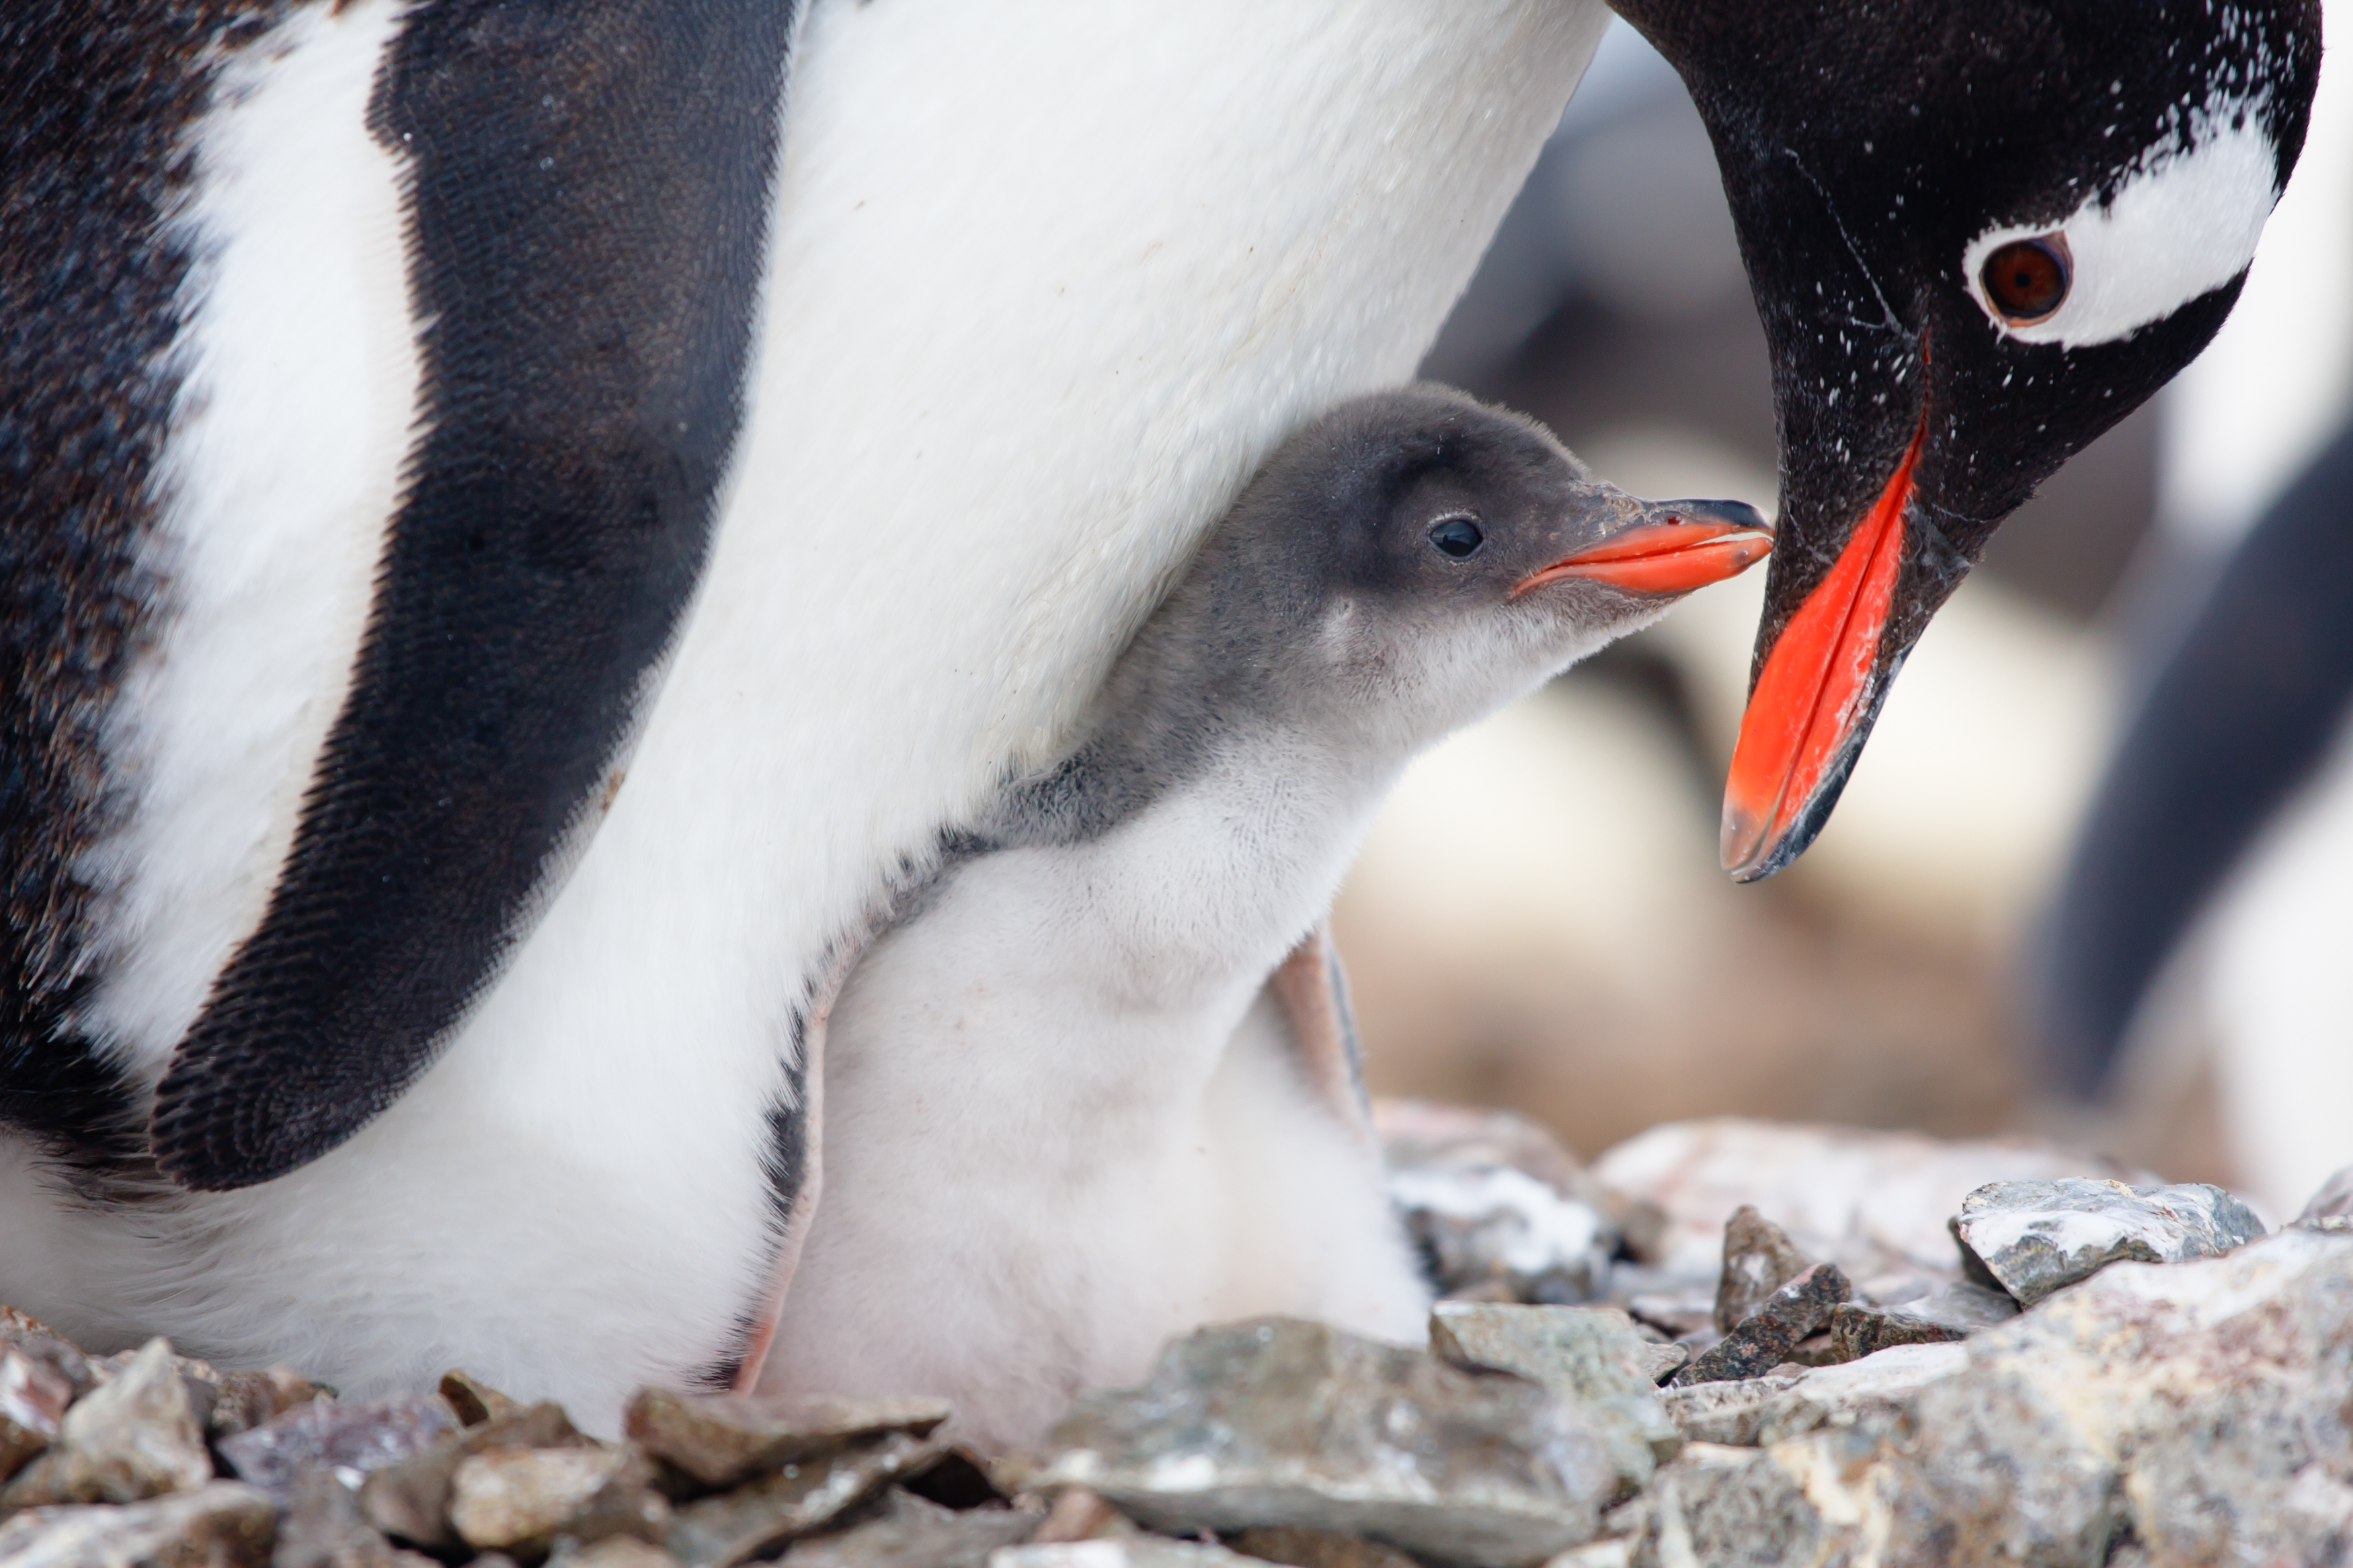 20 Black-and-White Facts About Penguins | Mental Floss